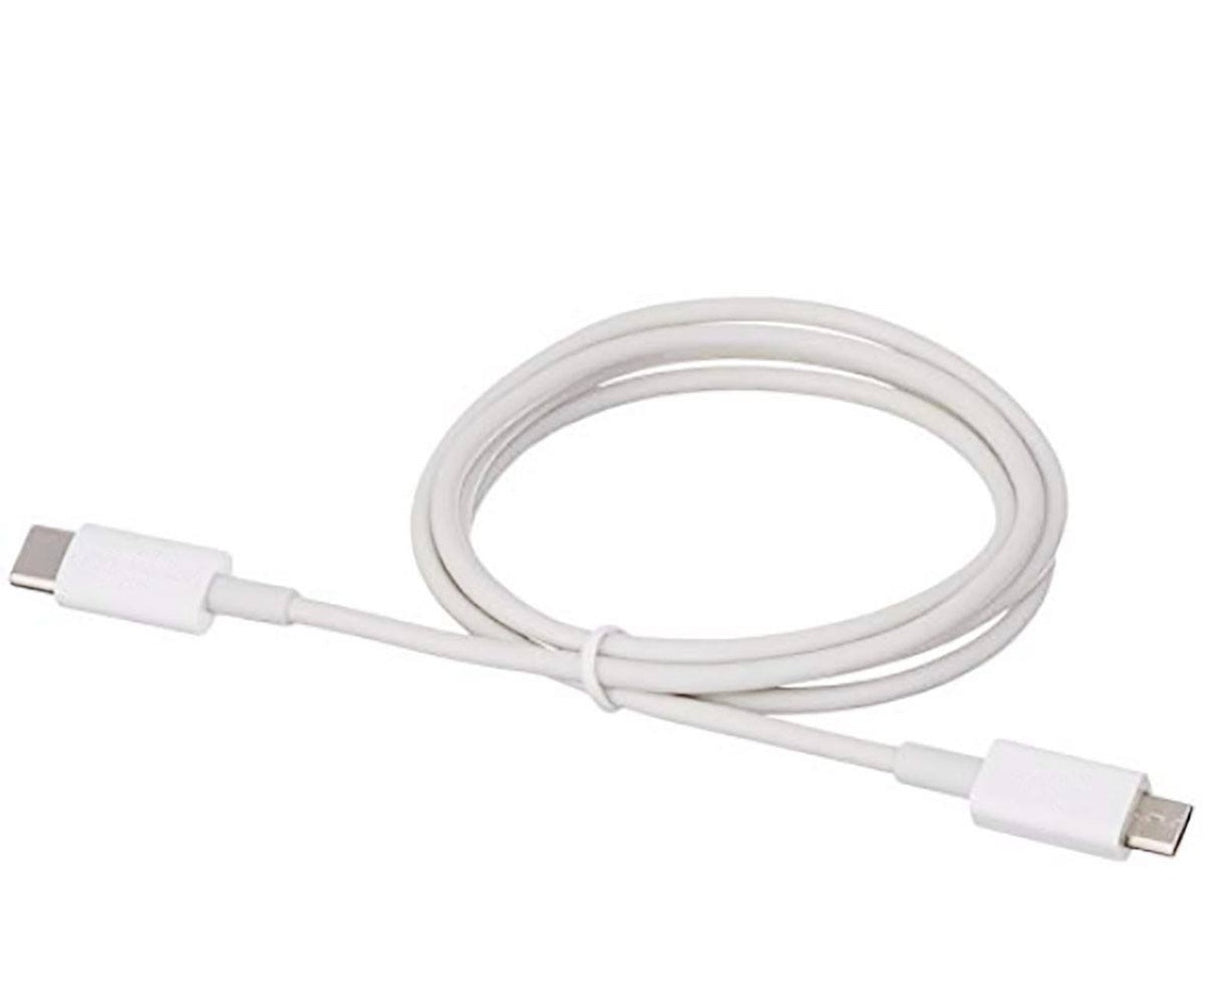 Maclan USB-C to USB Mirco Adapter Cable